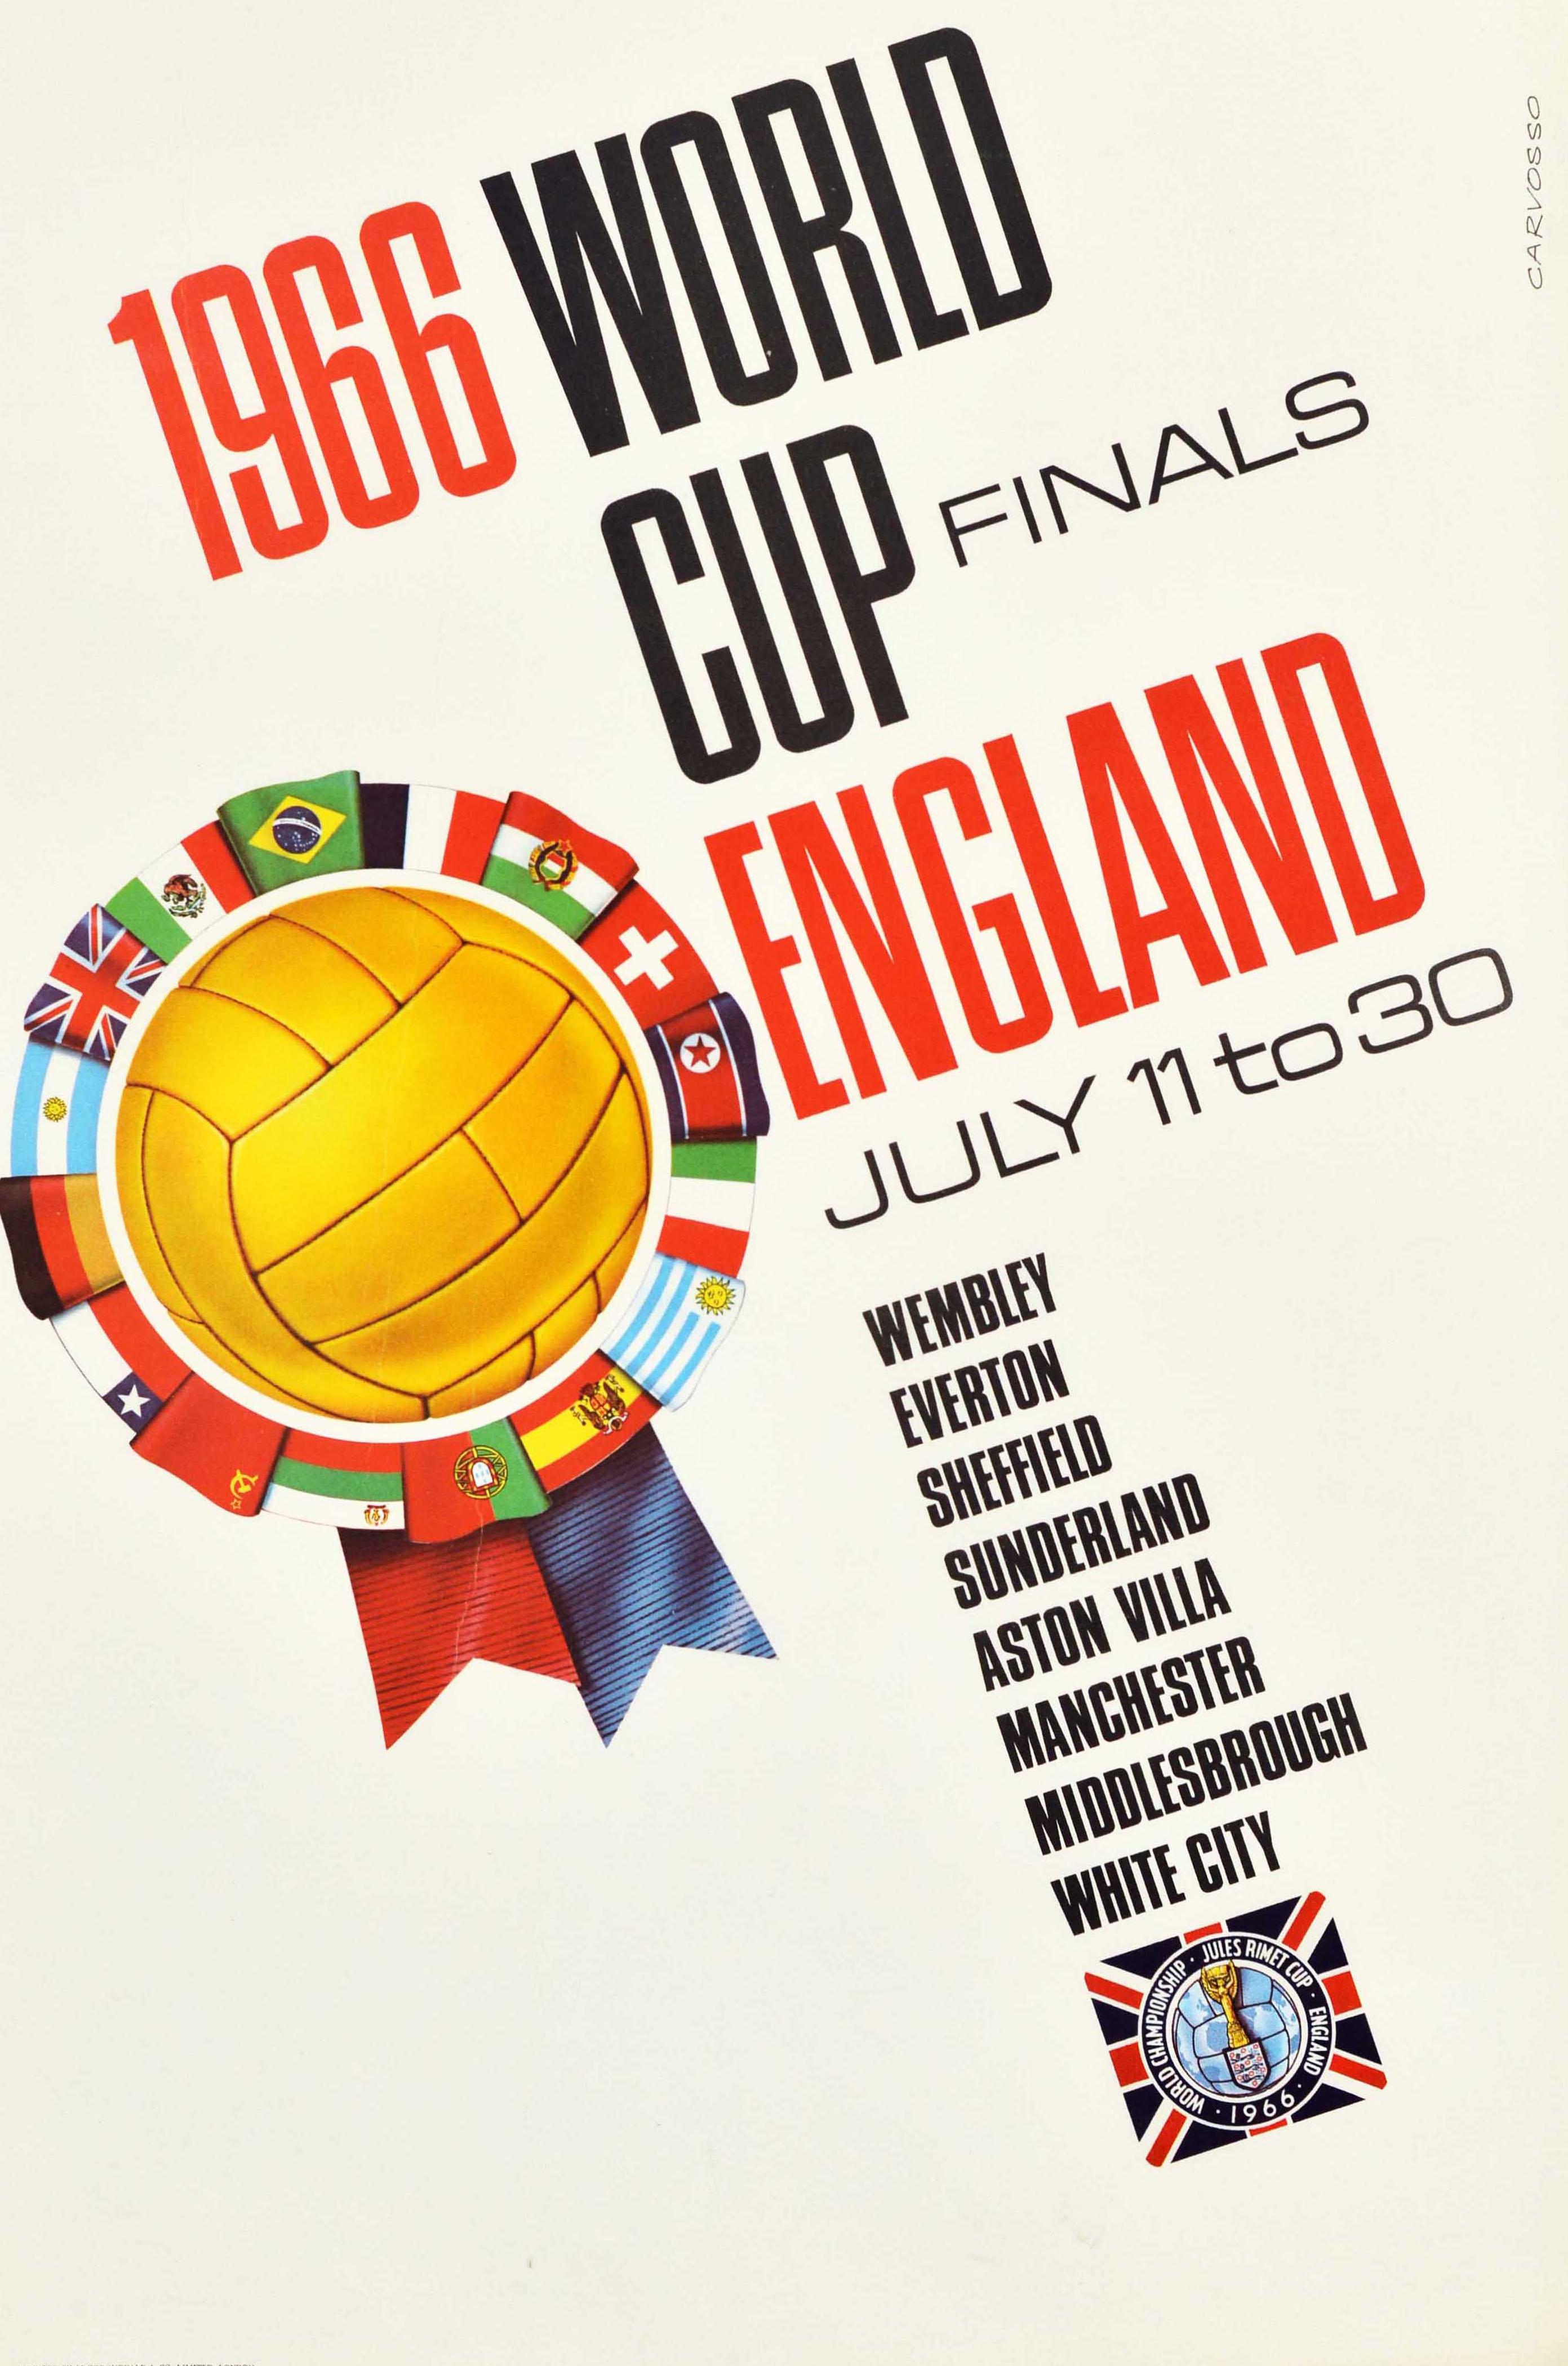 Original vintage sport advertising poster for the 1966 World Cup Finals England July 11 to 30 Wembley Everton Sheffield Sunderland Aston Villa Manchester Middlesbrough White City featuring a great illustration of a gold football surrounded by flags